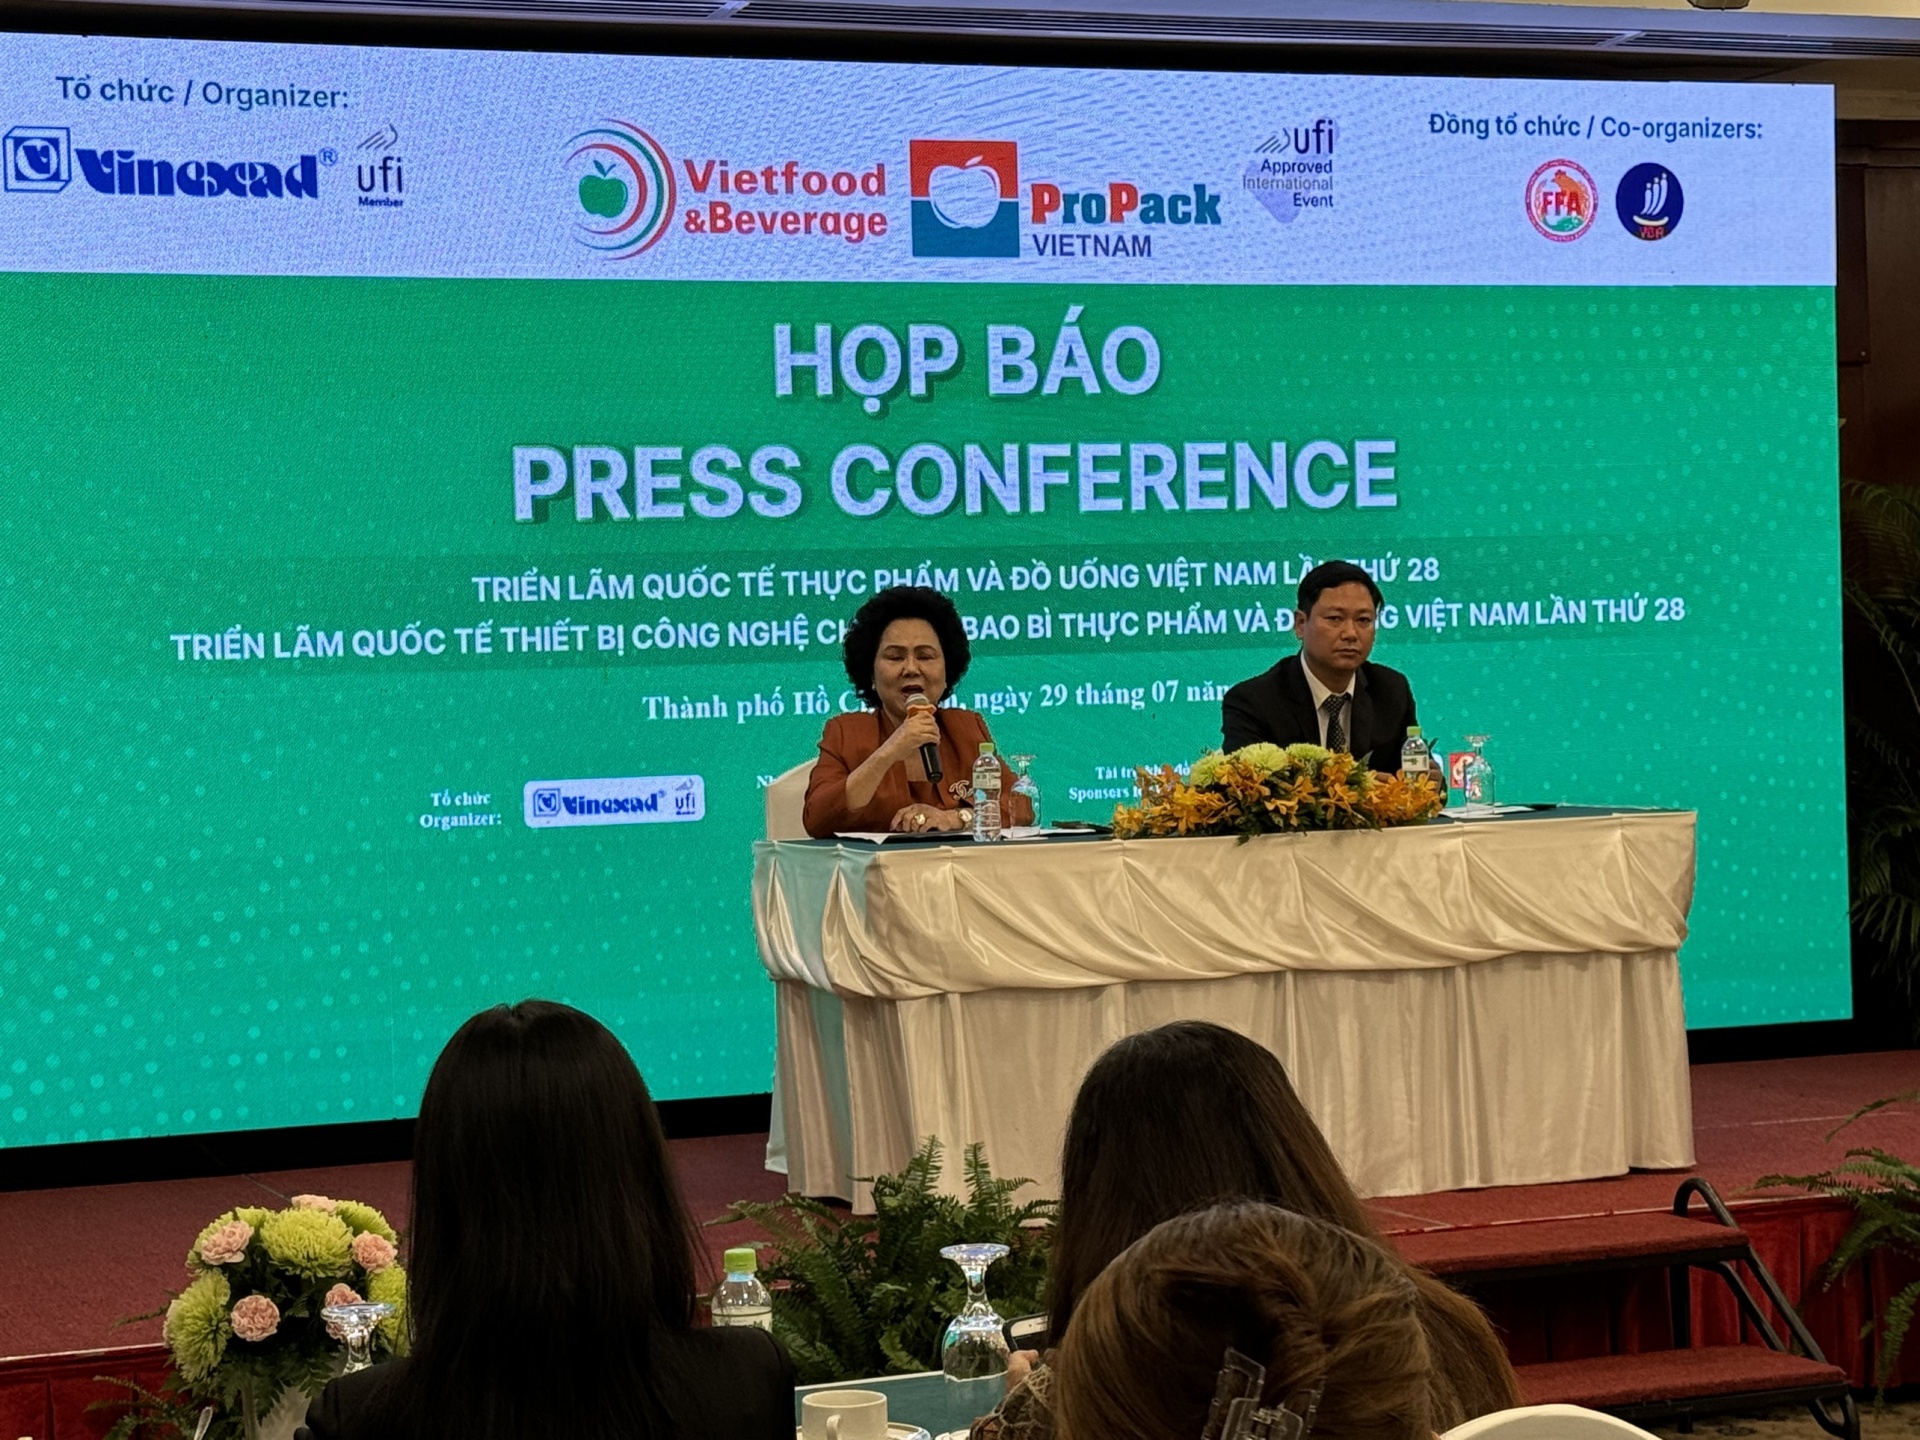 Food enterprises in Ho Chi Minh City eager to tap into market recovery